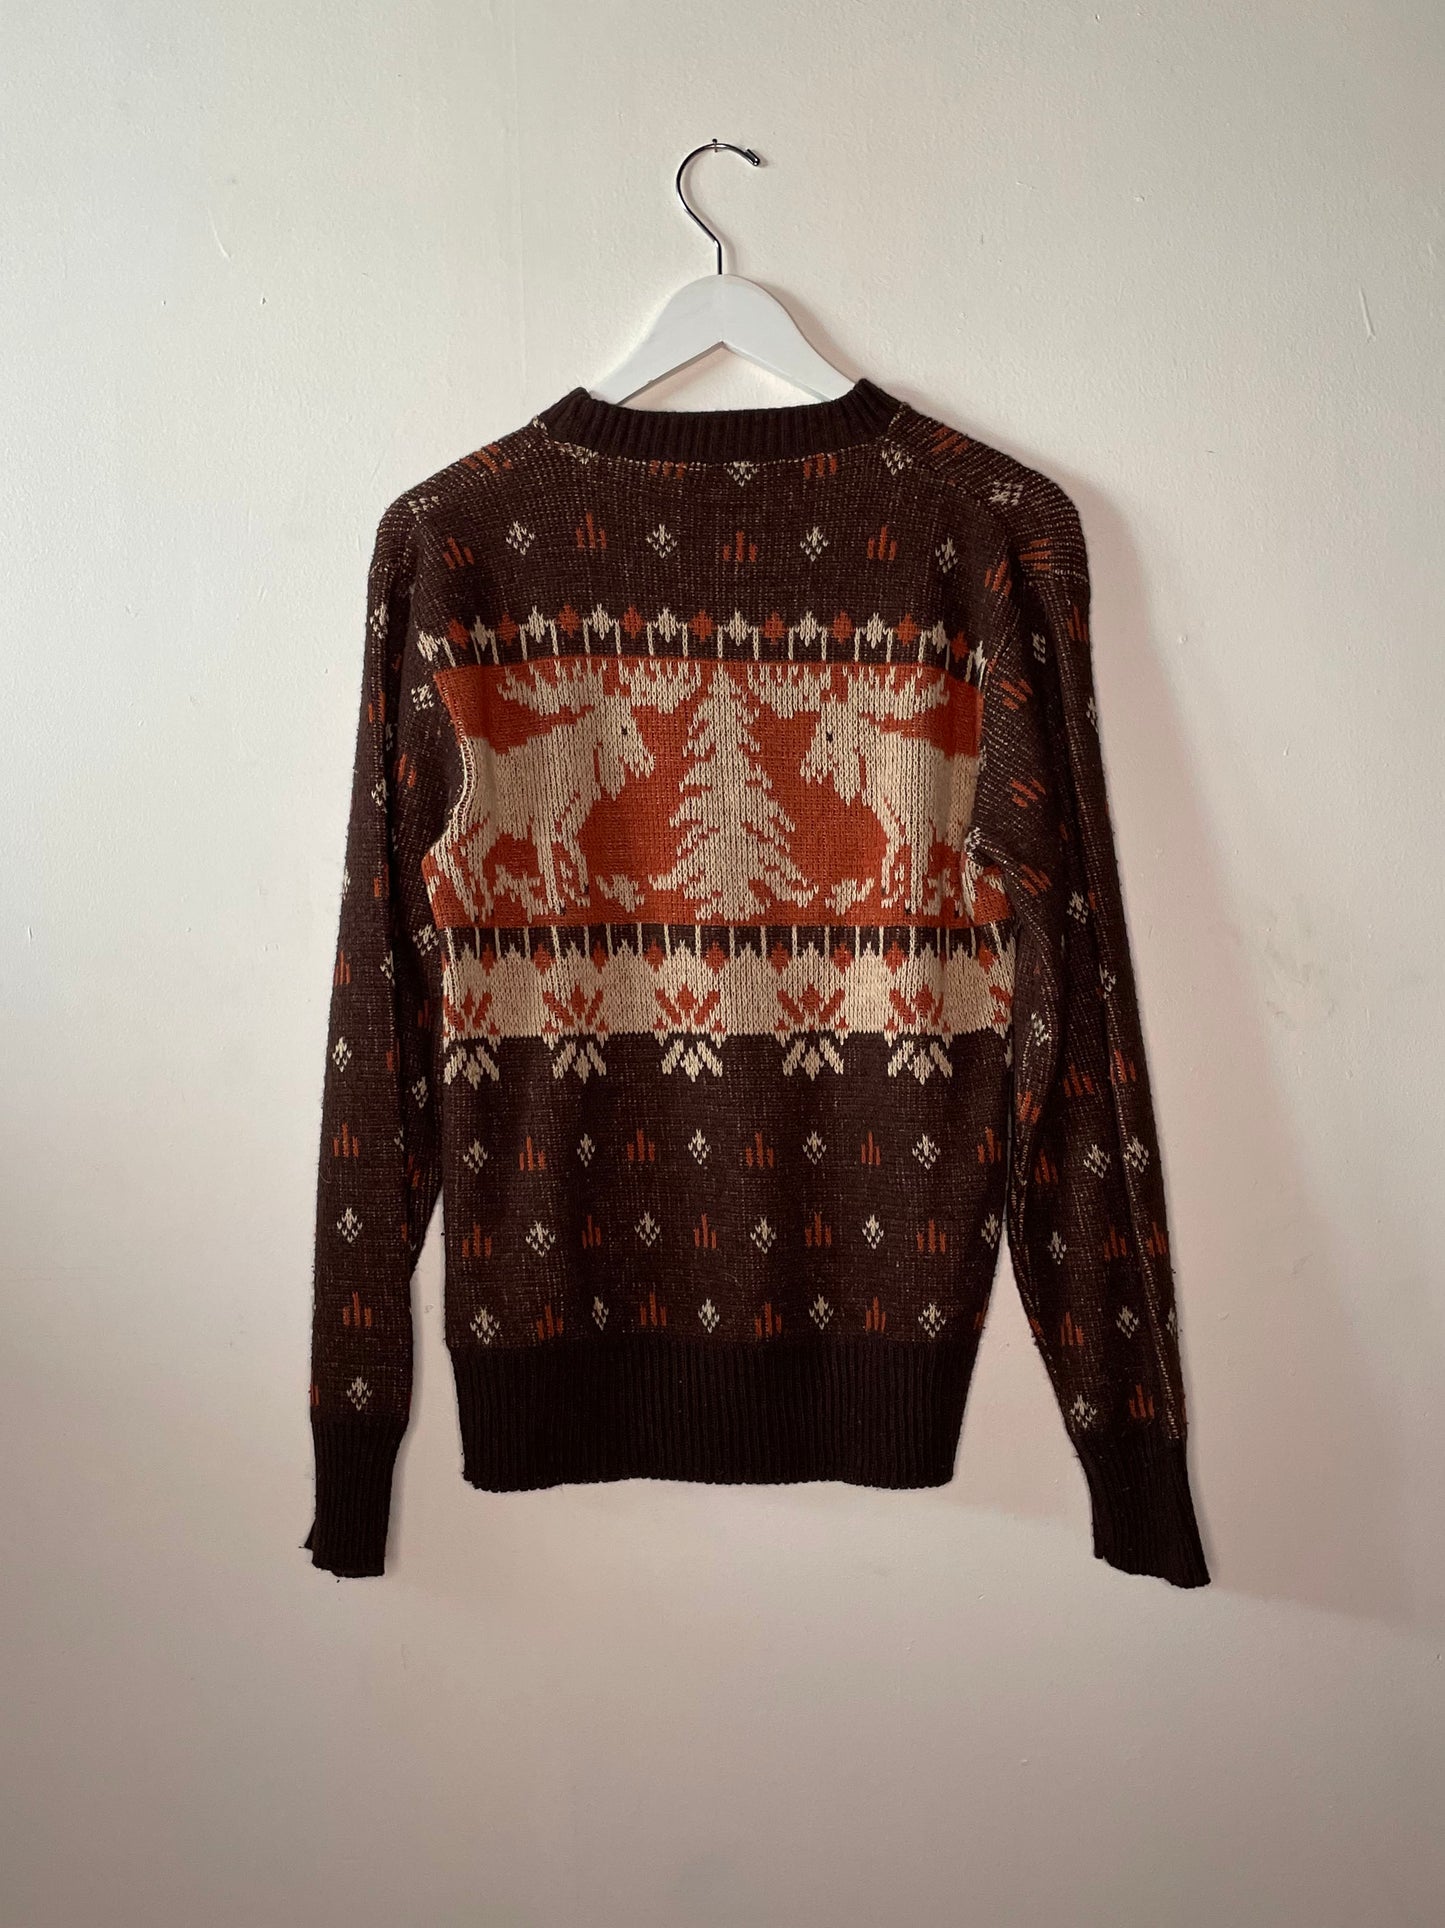 Crew Neck Knit Pullover Sweater with Moose Design